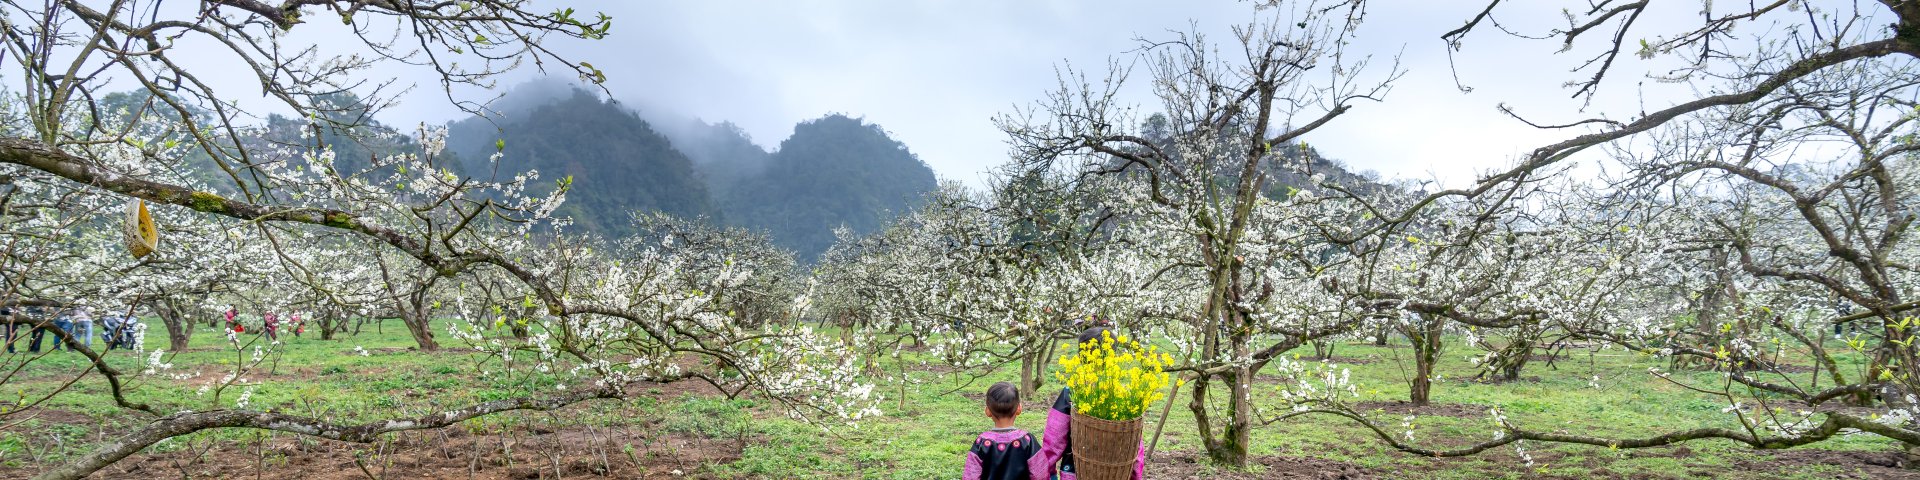 Back View of Children Carrying Yellow Flowers in a Basket to a Blossoming Orchard